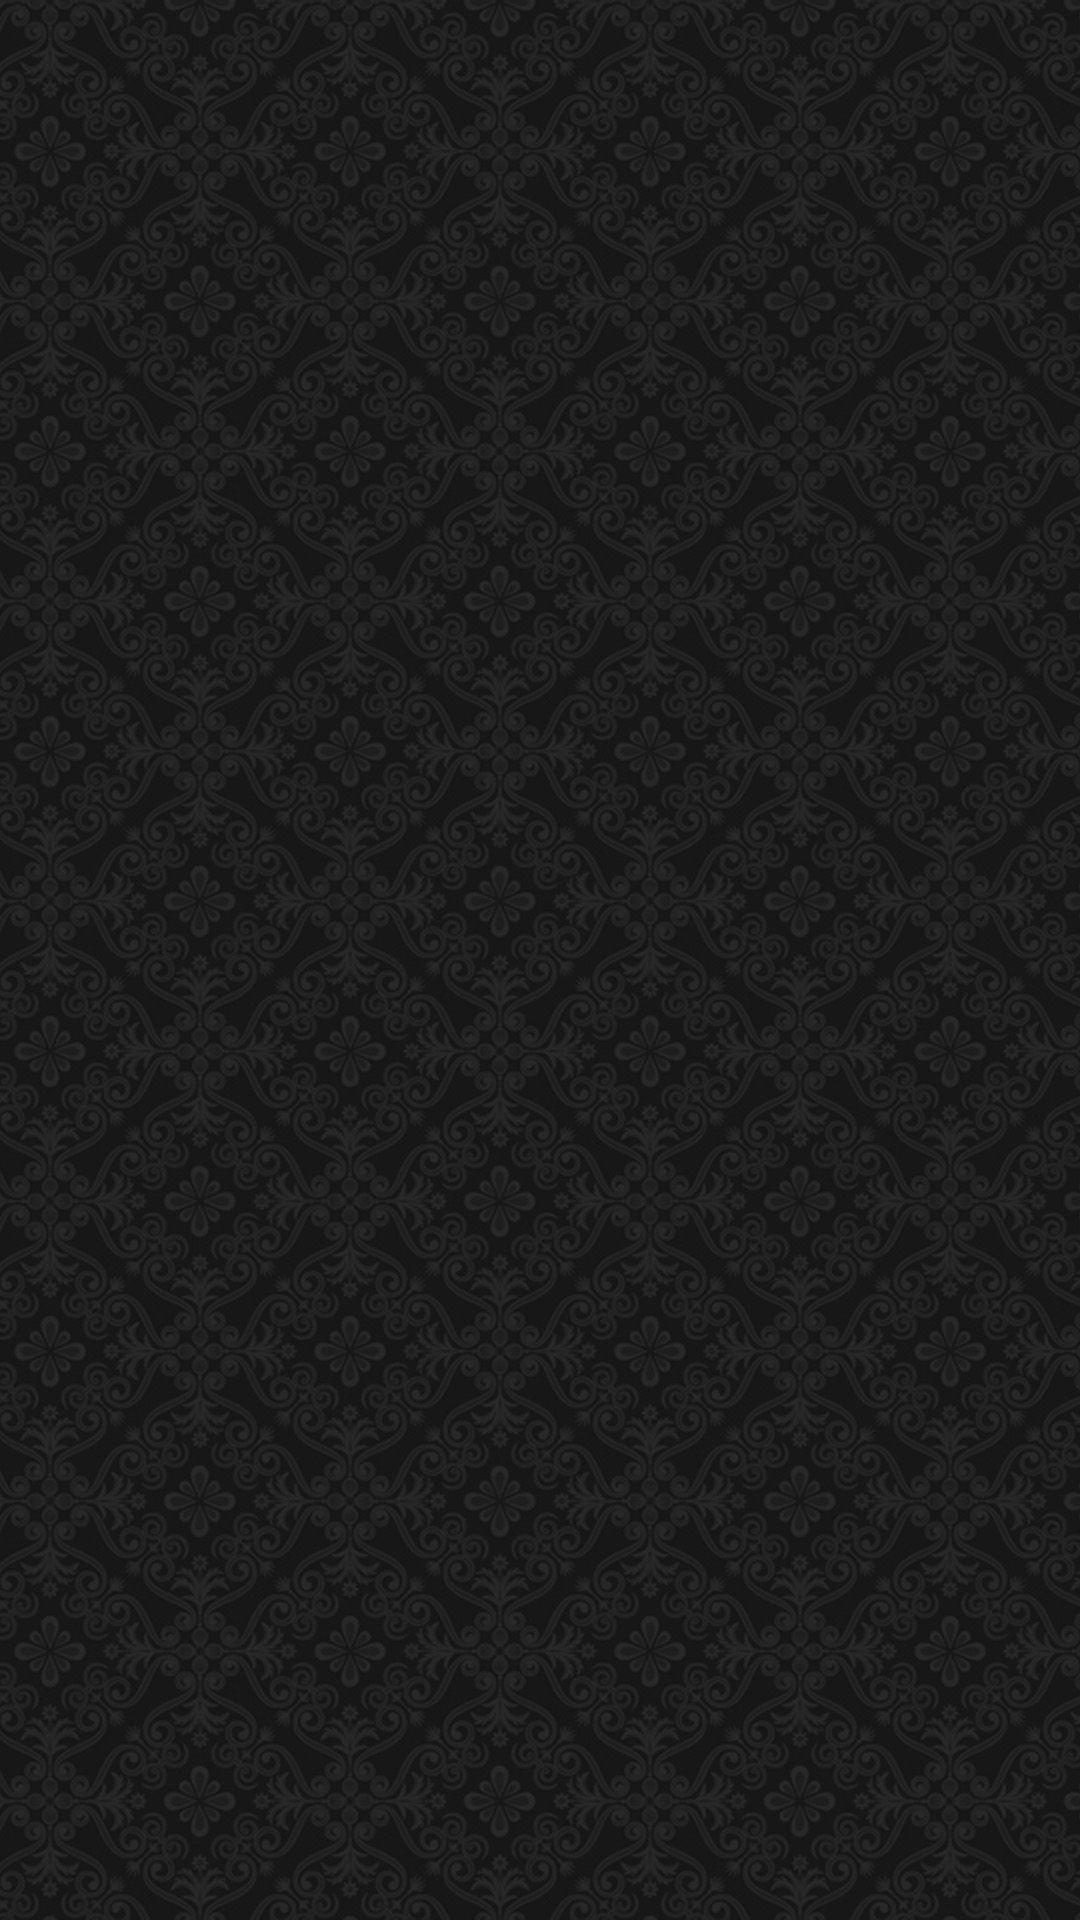 IPhone 6 Wallpapers Dark Patterns - iPhone6wp.com